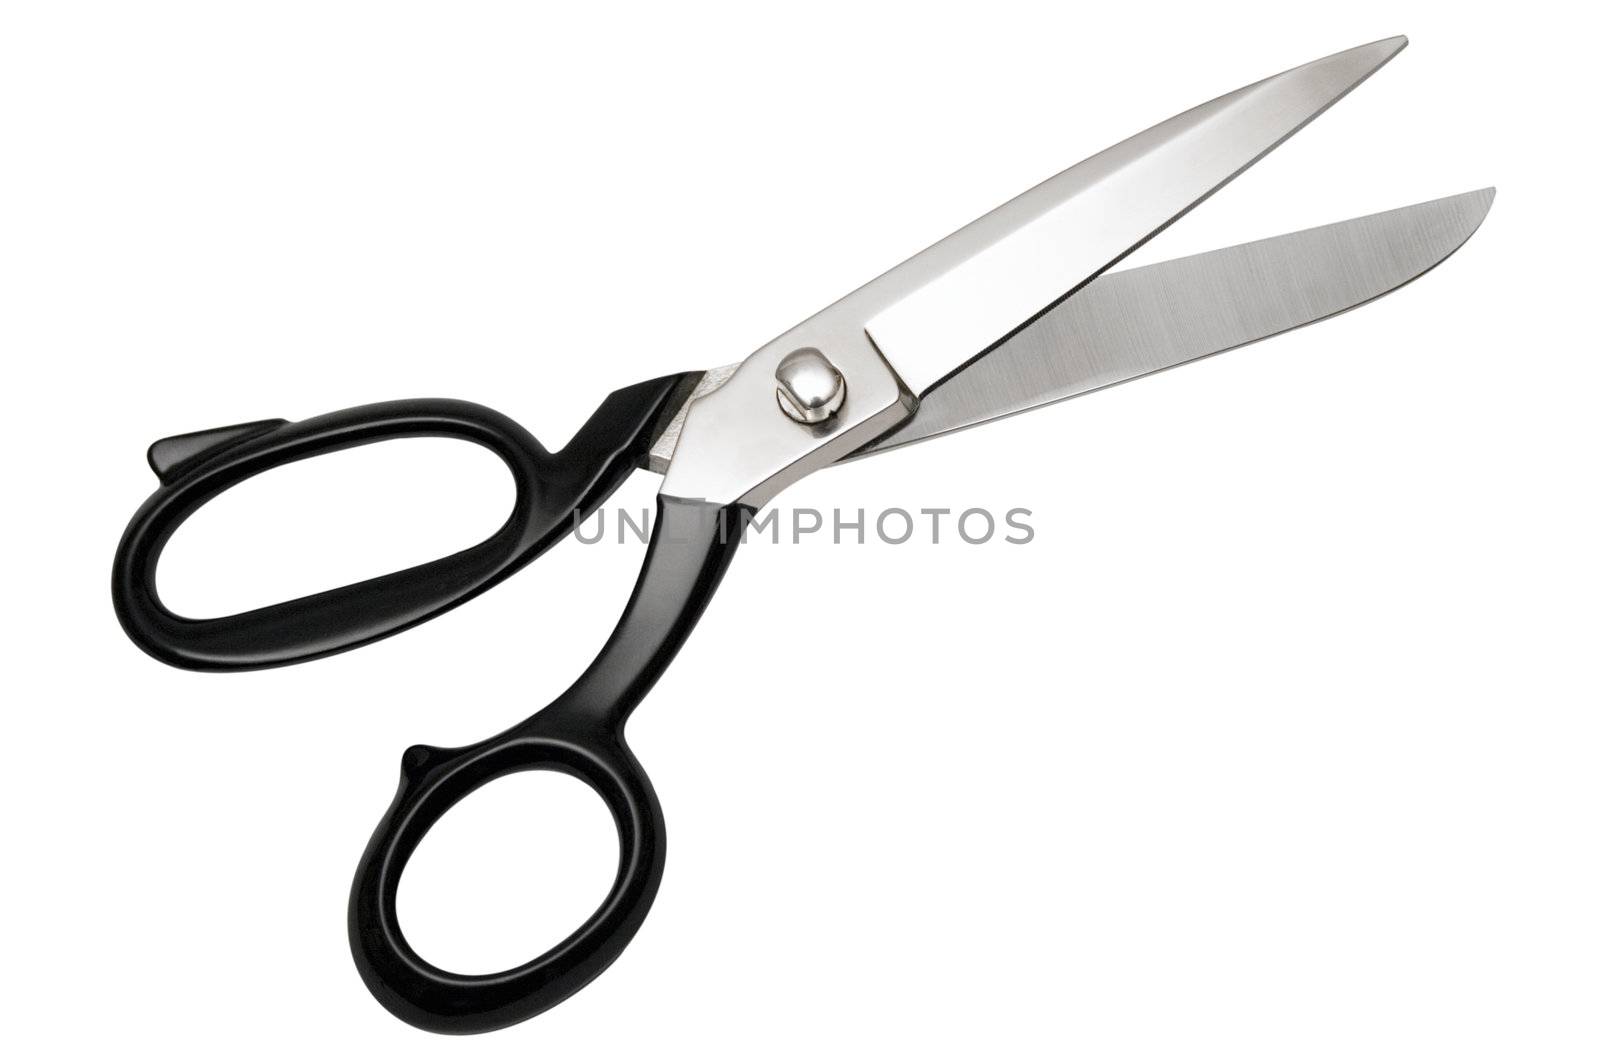 Scissors with Clipping Path by winterling